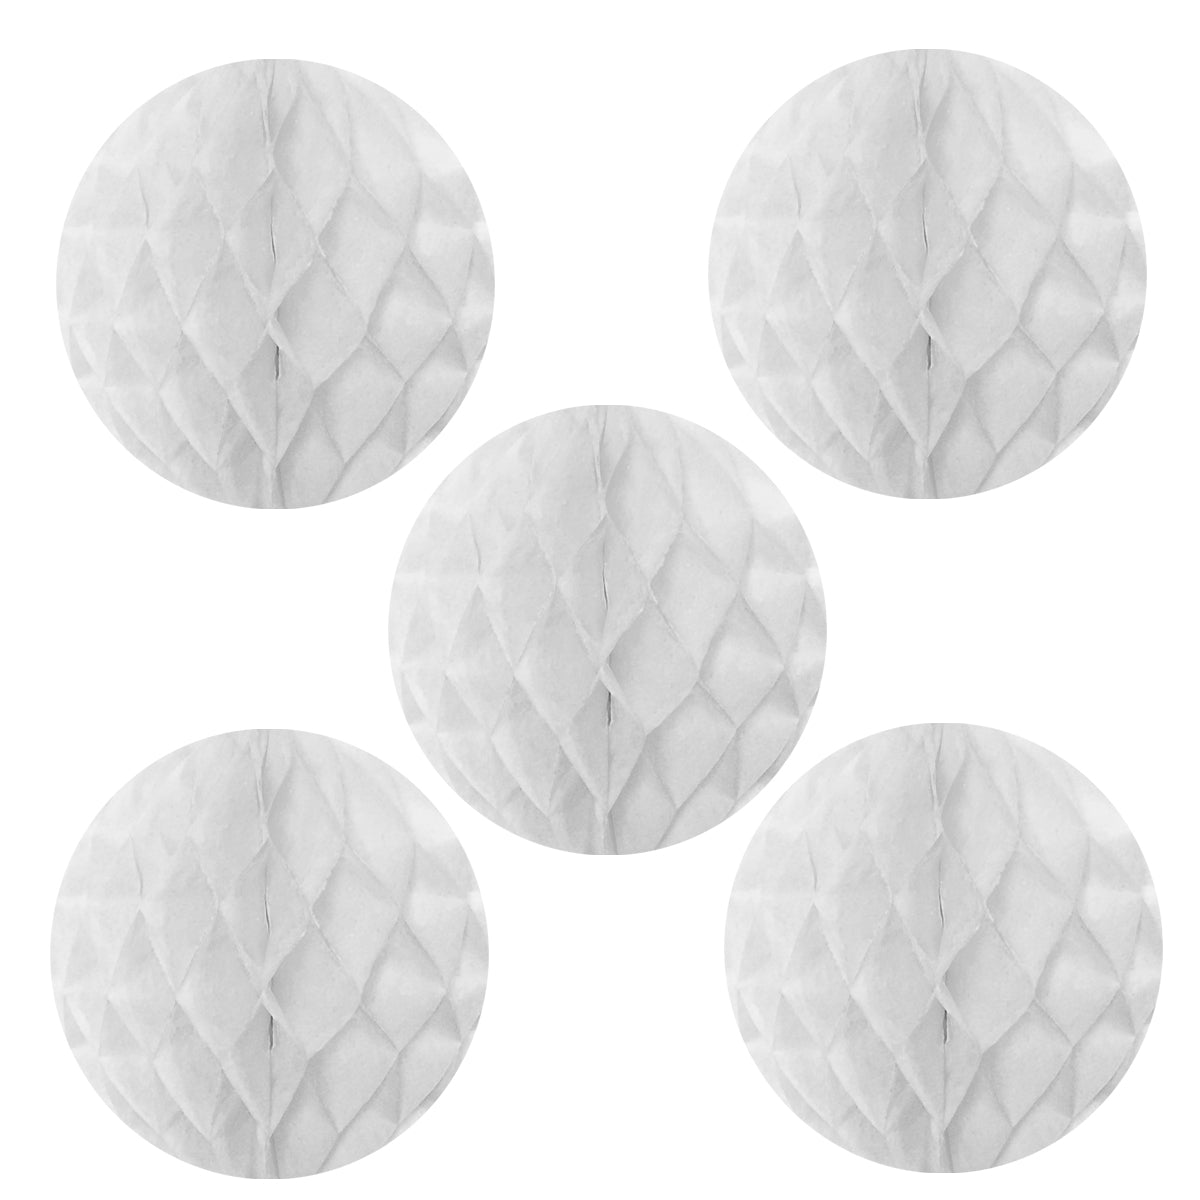 Wrapables 6" Set of 5 Tissue Honeycomb Ball Party Decorations